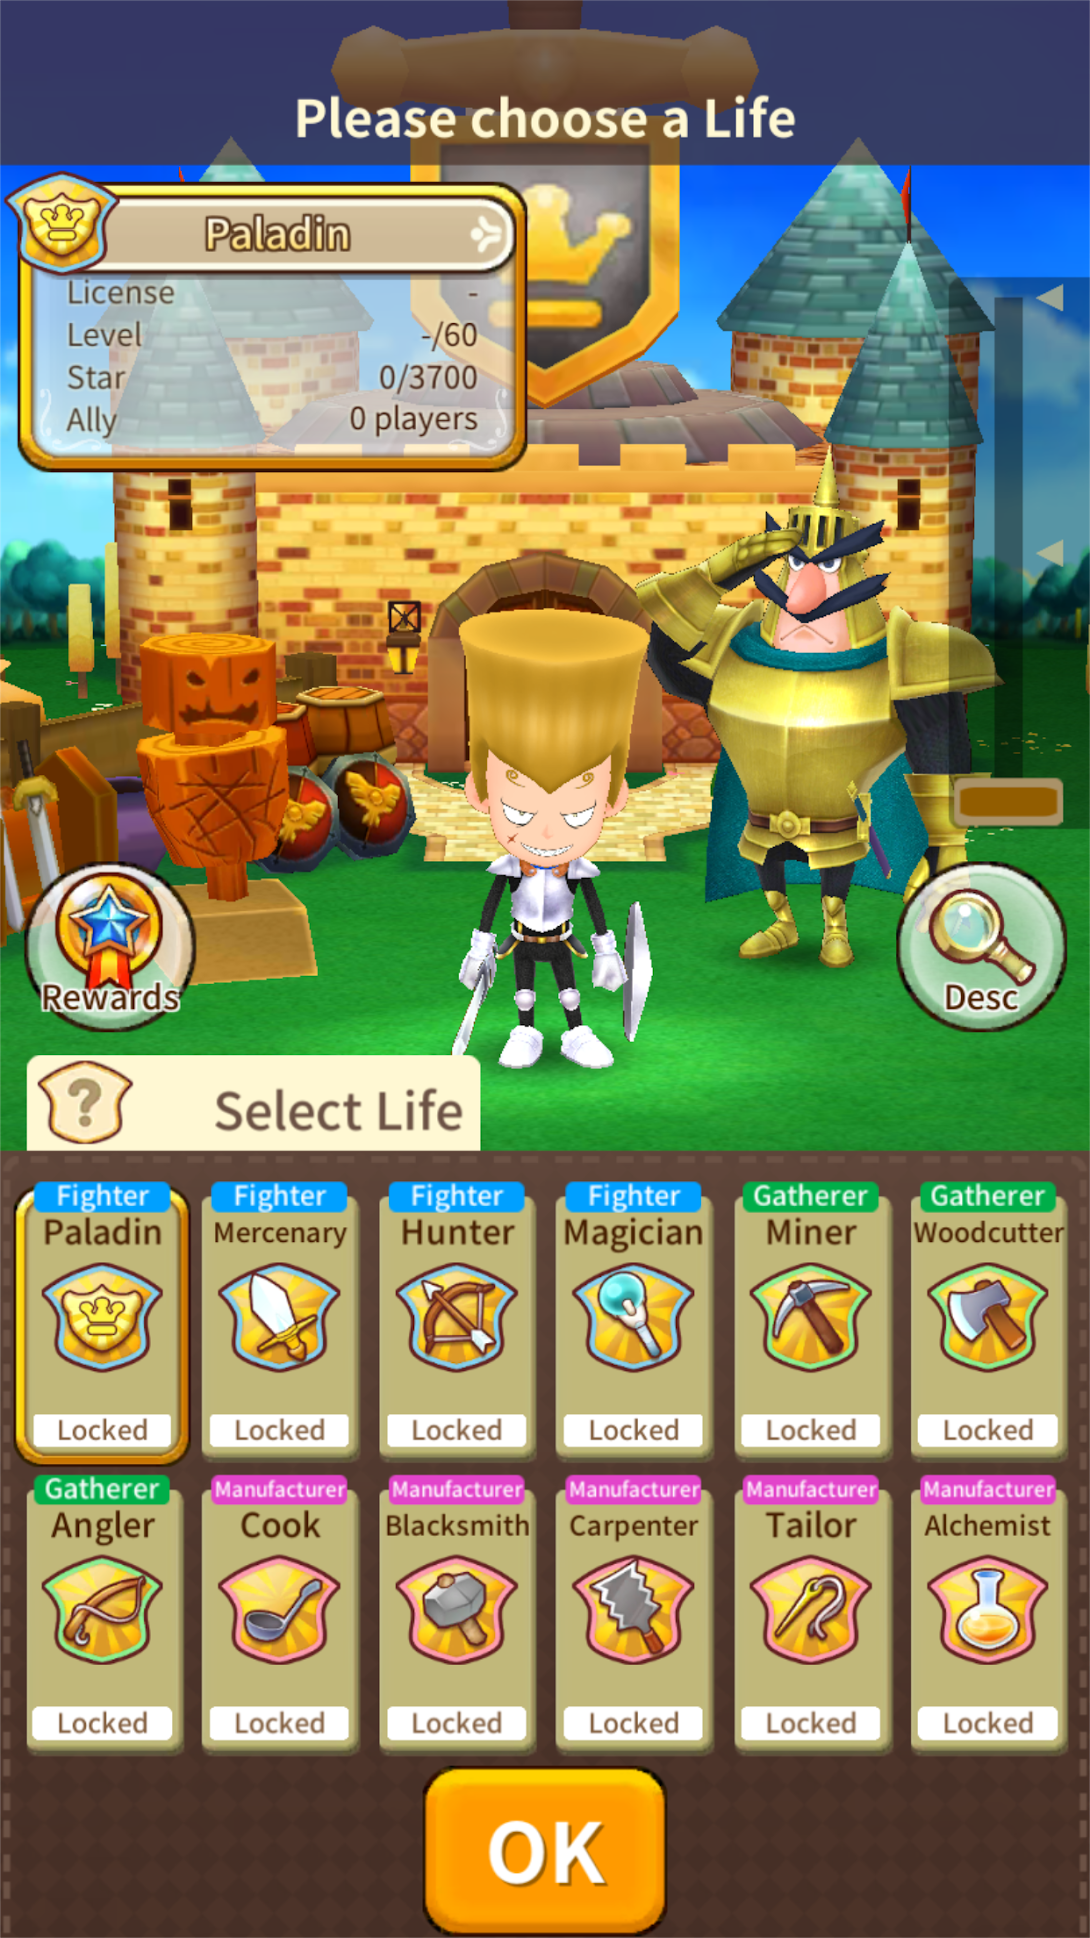 Fantasy Life Online' from Boltrend Games and Level-5 Can Now Be Downloaded  Ahead of Servers Going Live Later Today – TouchArcade